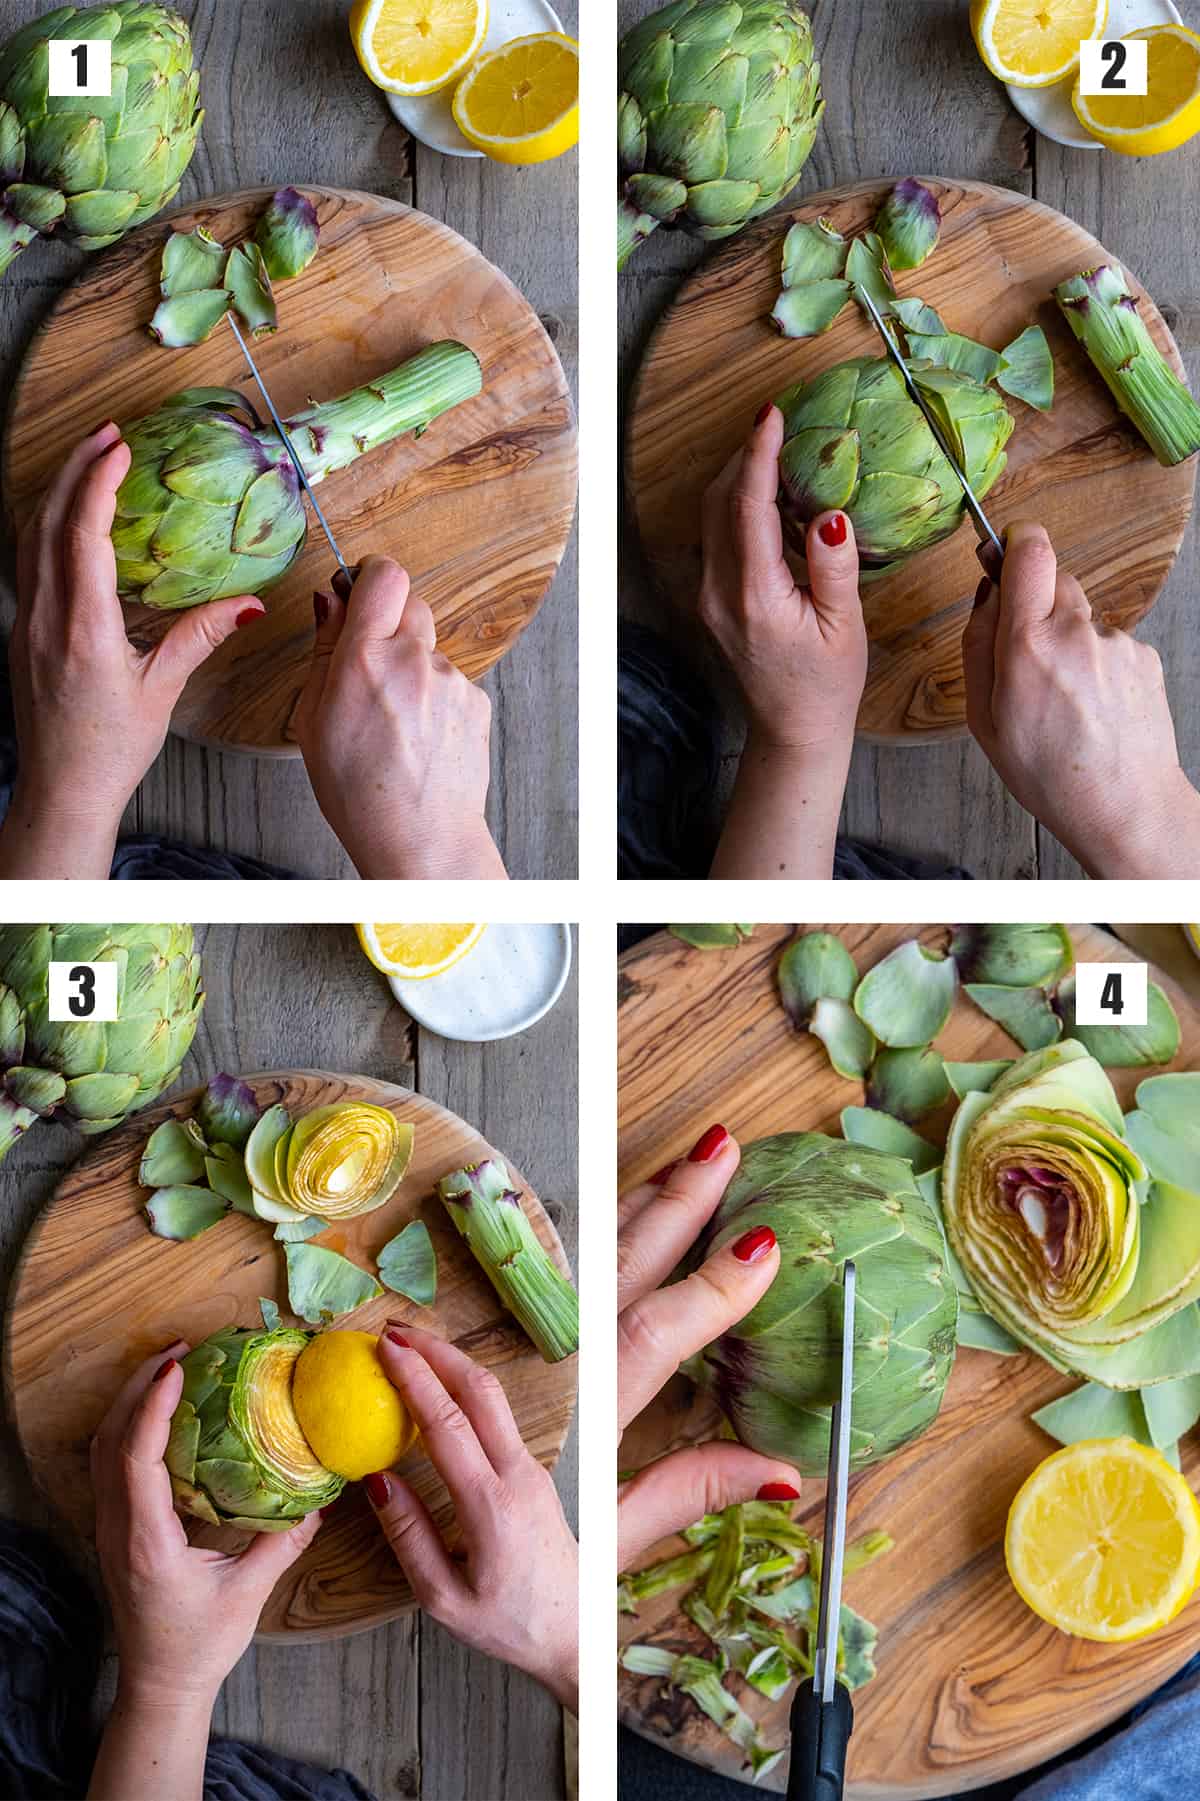 A collage of four pictures showing how to cut an artichoke and rub it with lemon.